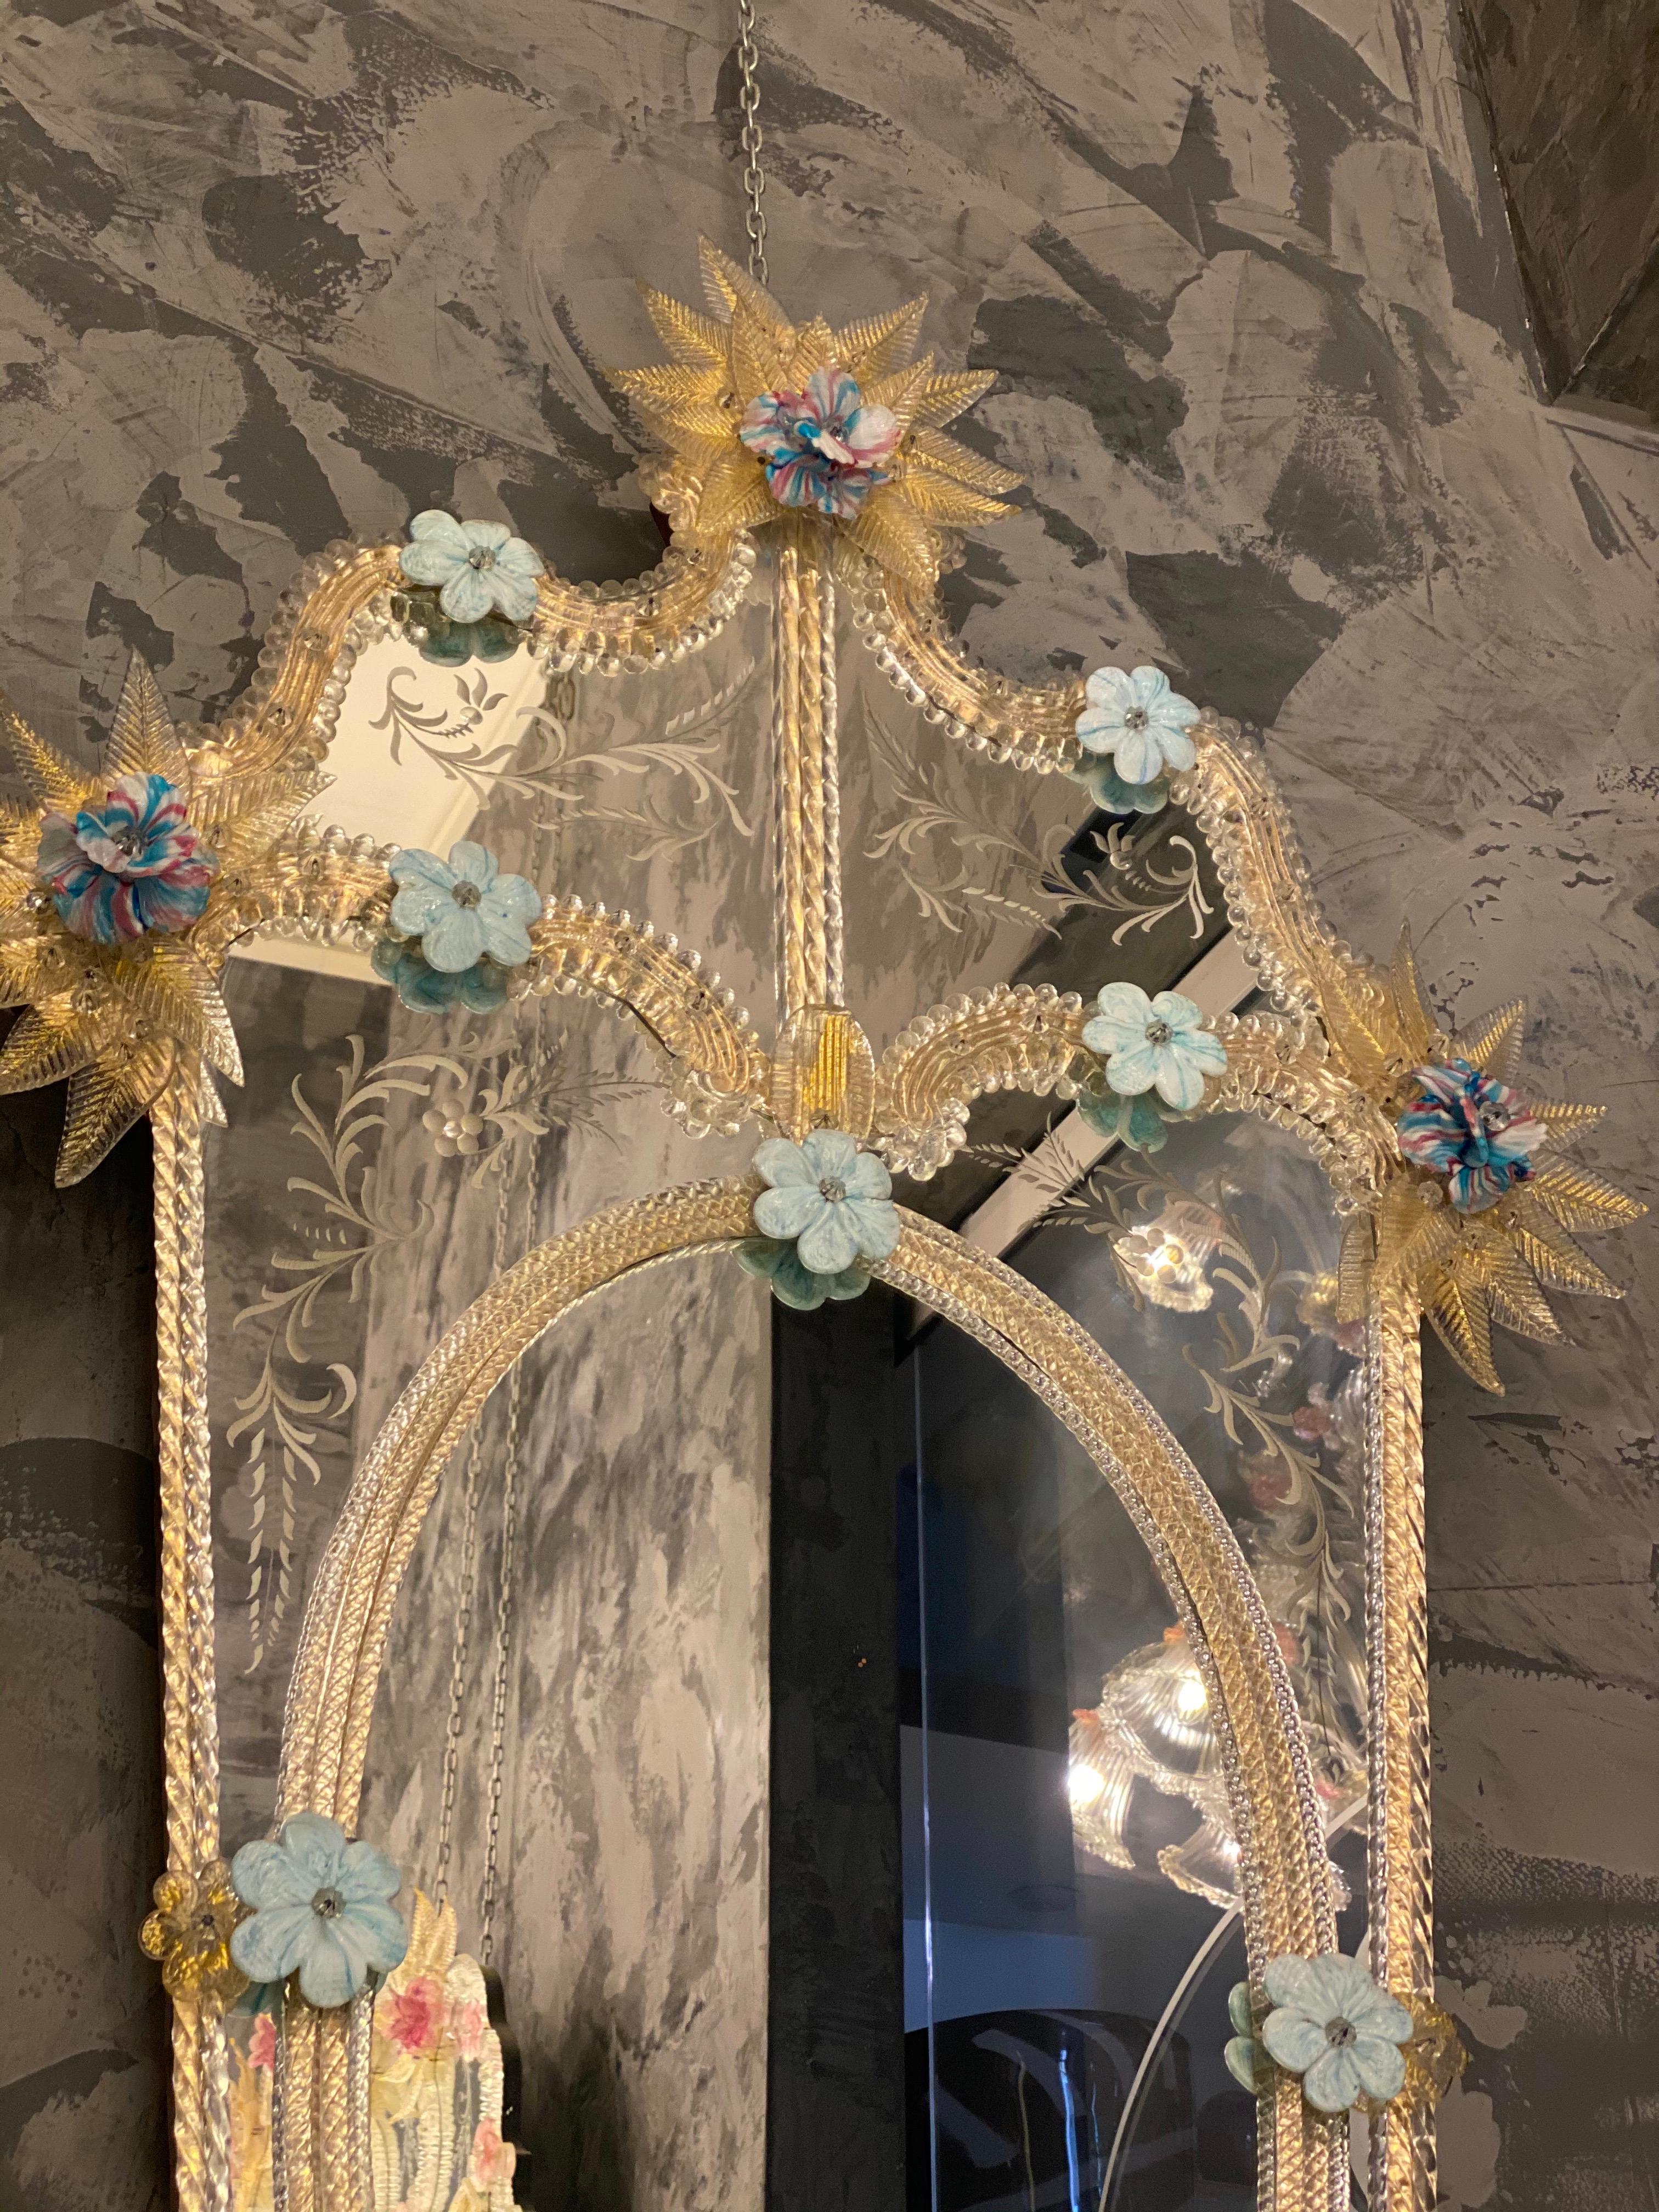 This delicious Venetian mirror features etched figure motifs adorning the mirrored frame. Along the edges of the frame are gold glass rope accents and numerous glass light blu and multicolor pasta vitrea flowers.
Executed by the great a Master of